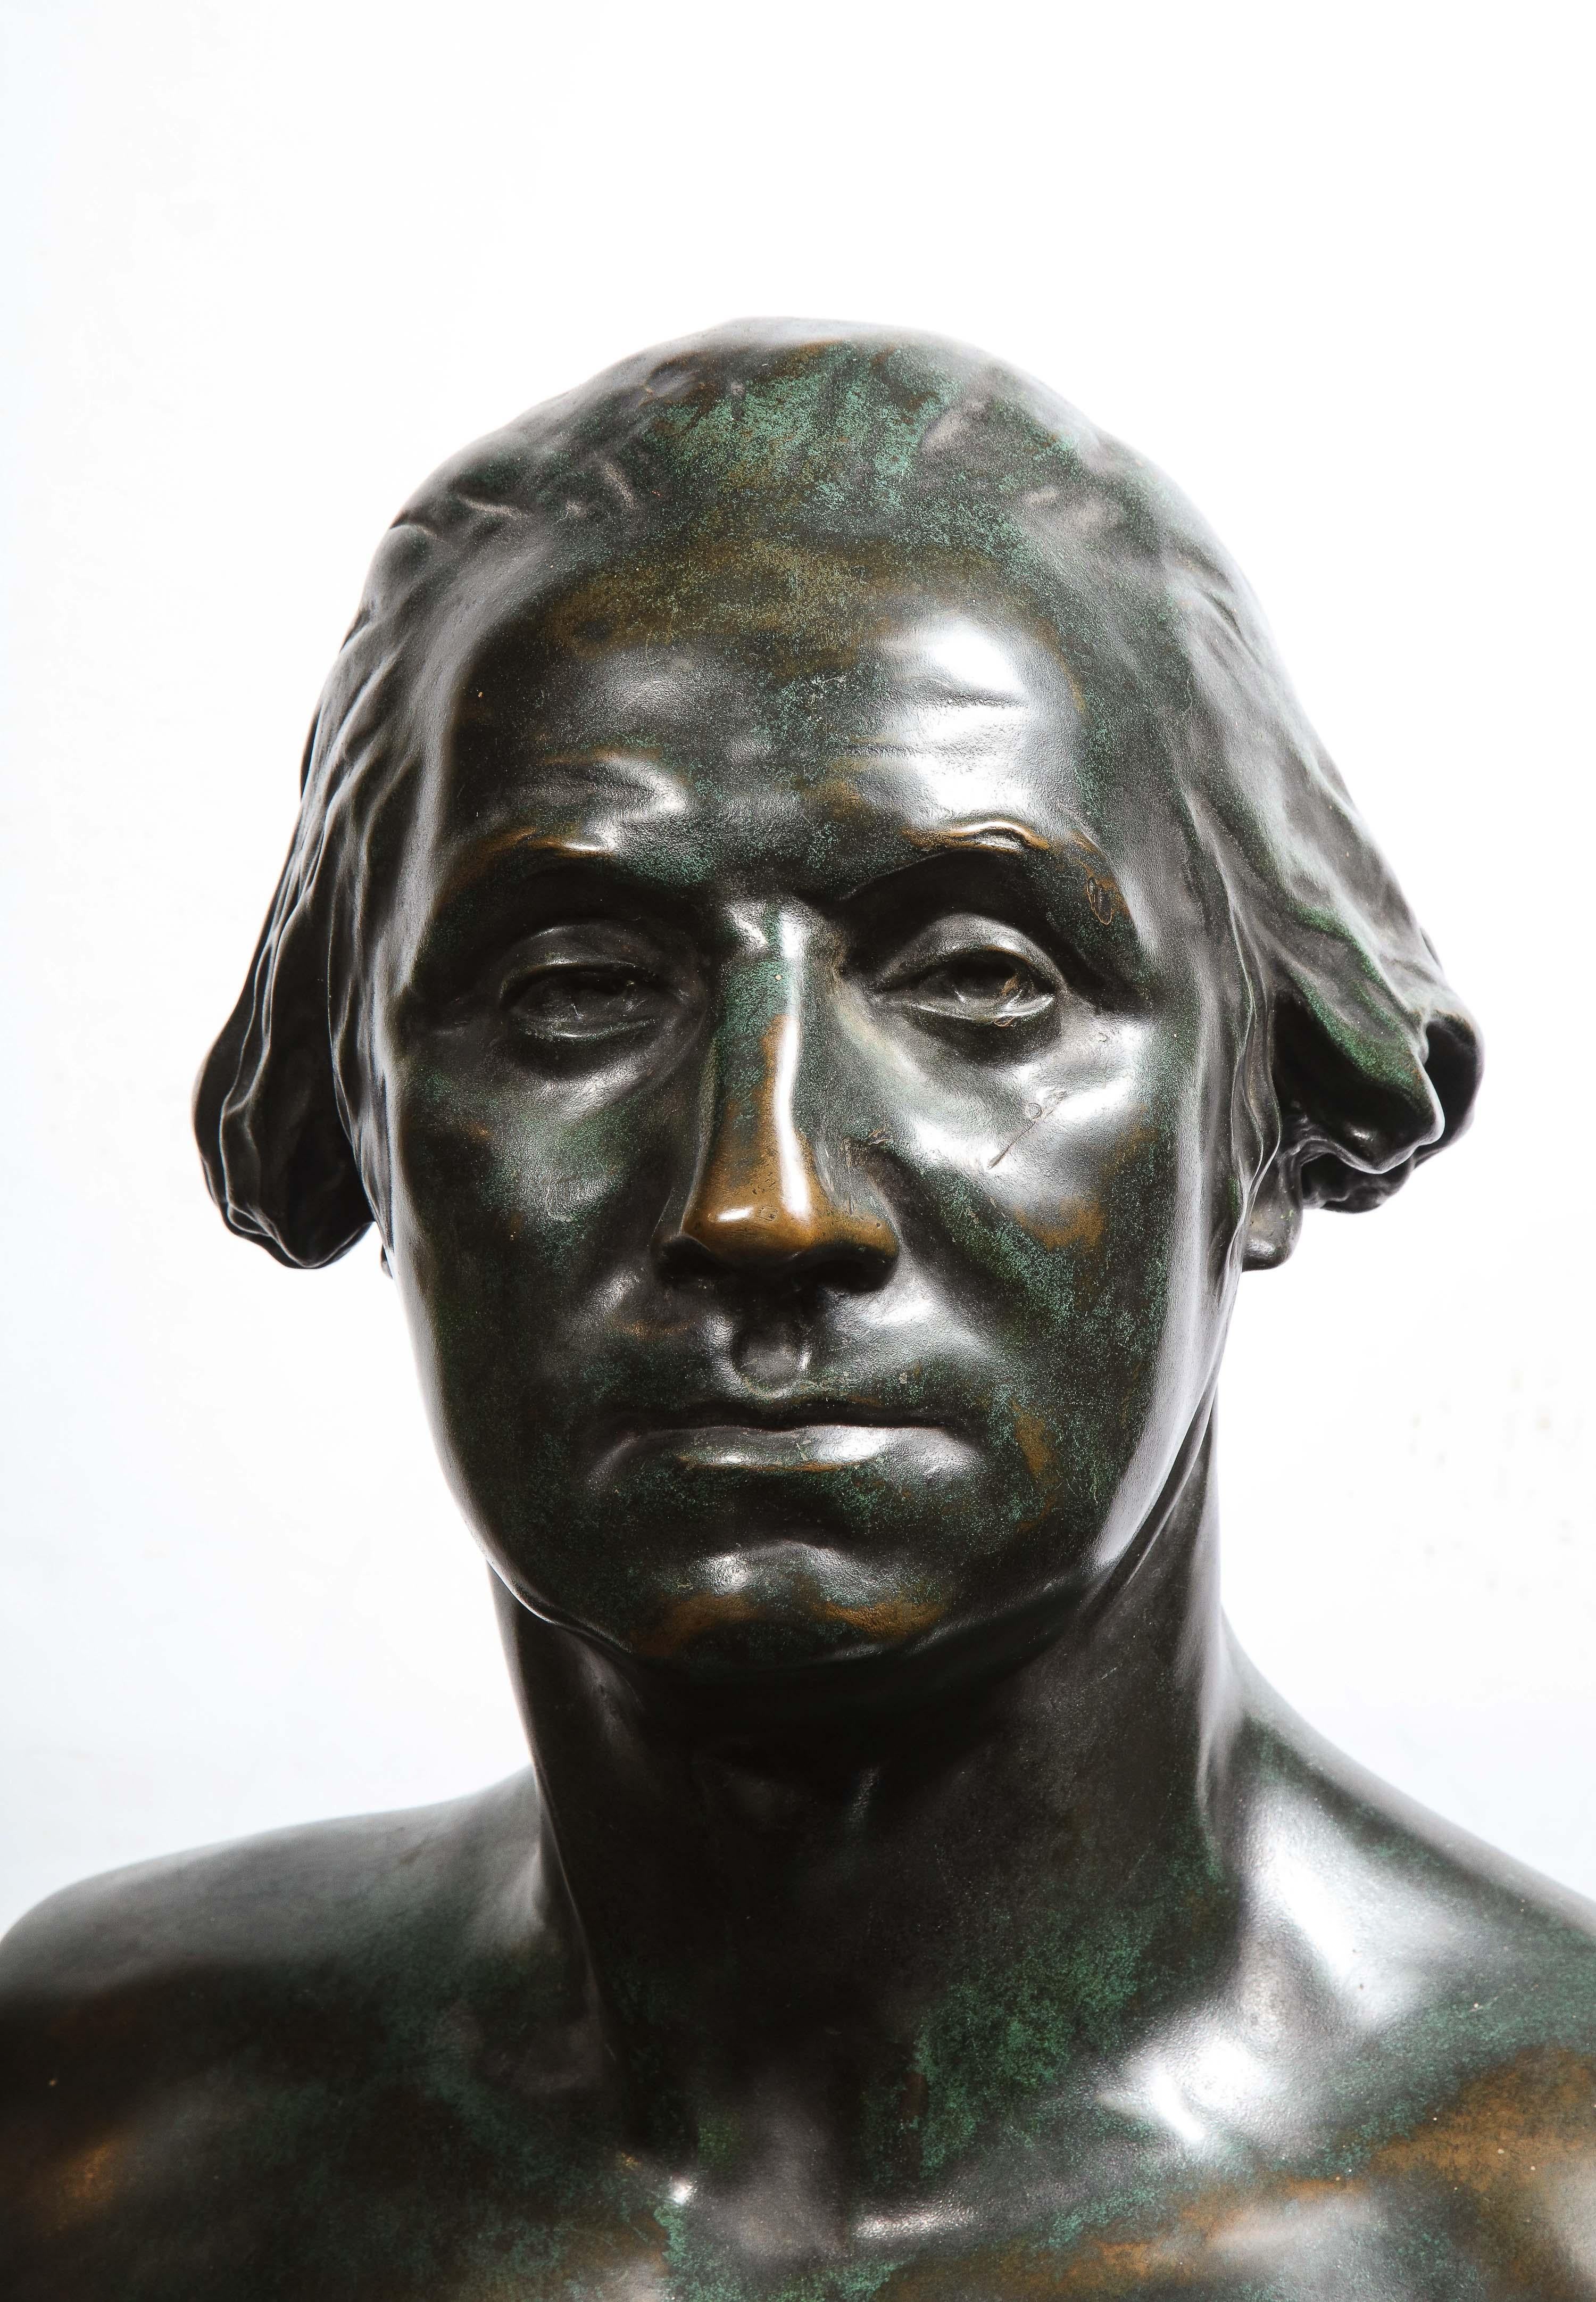 A Large and Rare Patinated Bronze Bust of George Washington, after Houdon by F. Barbedienne Foundry, circa 1870.

Very nice quality green patinated bronze bust of President Washington. After the famous model by Houdon.

Bronze busts of George